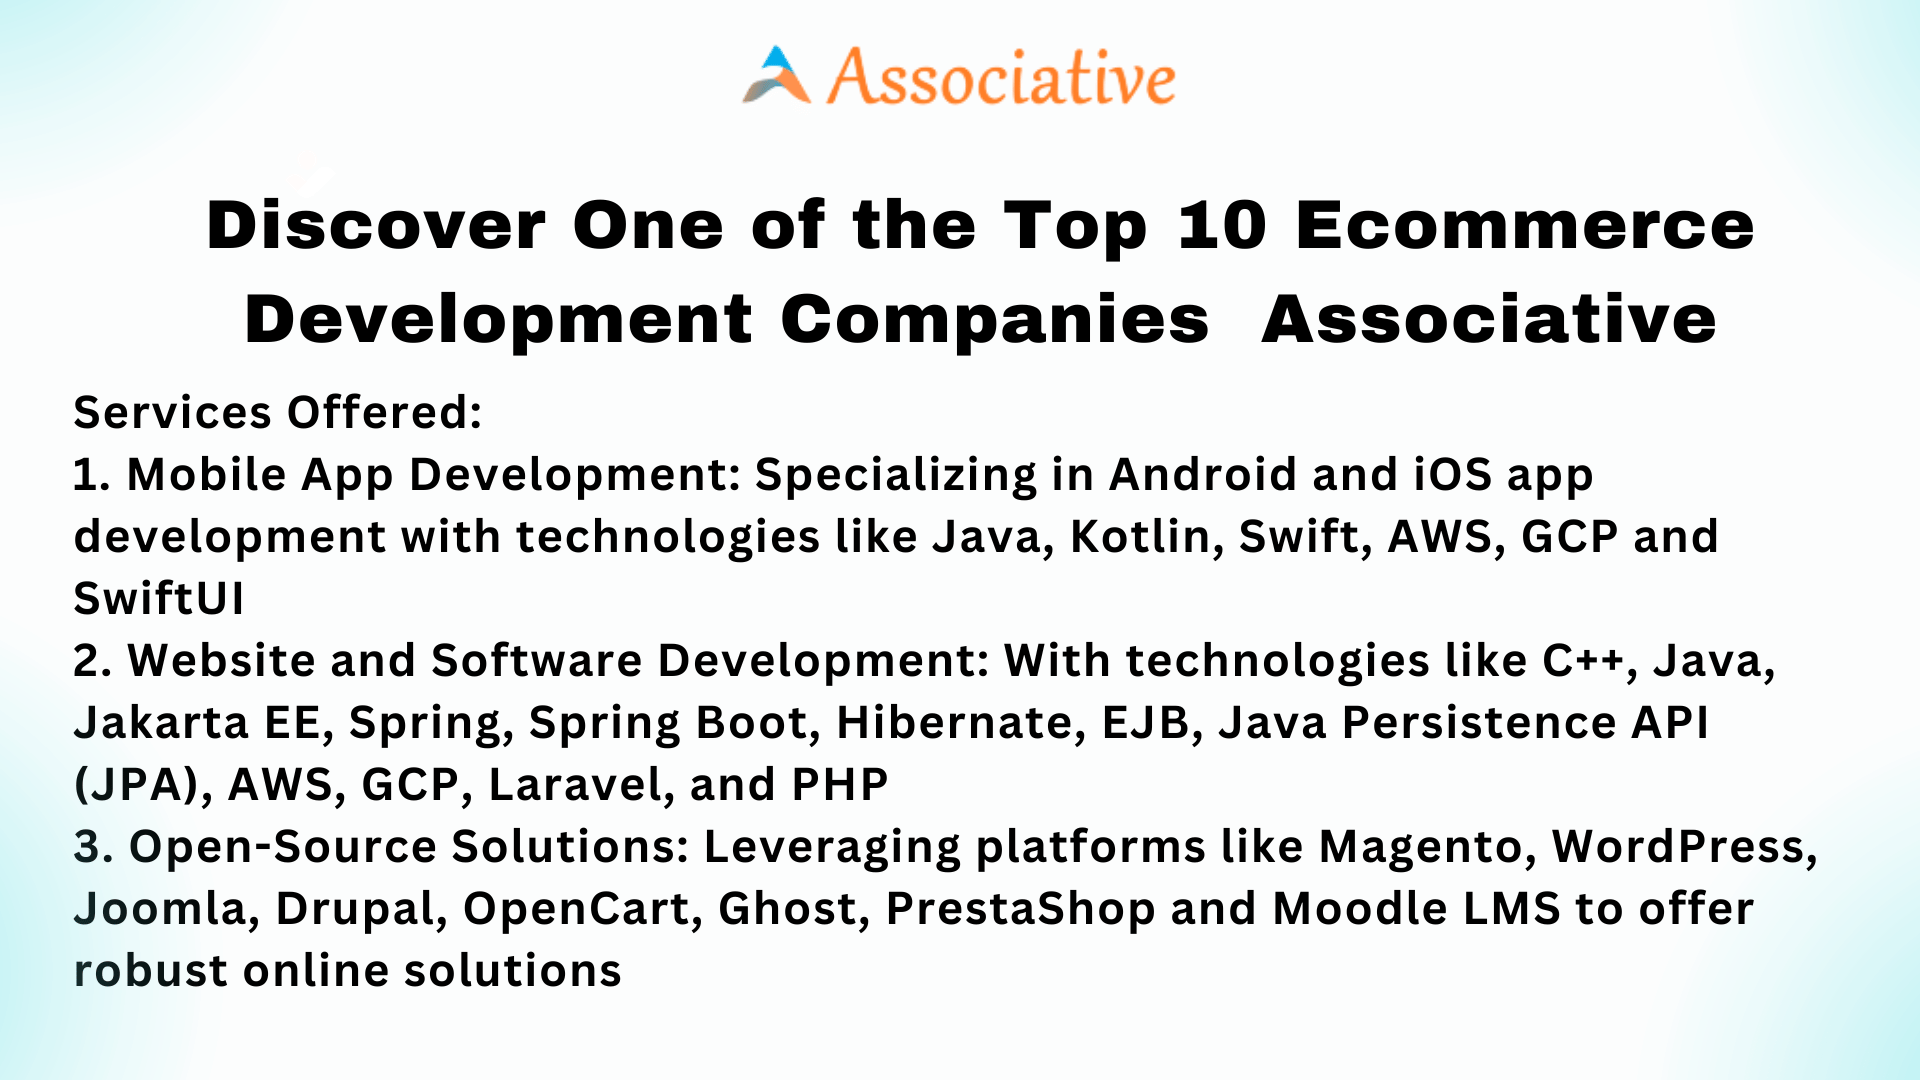 Discover One of the Top 10 Ecommerce Development Companies Associative